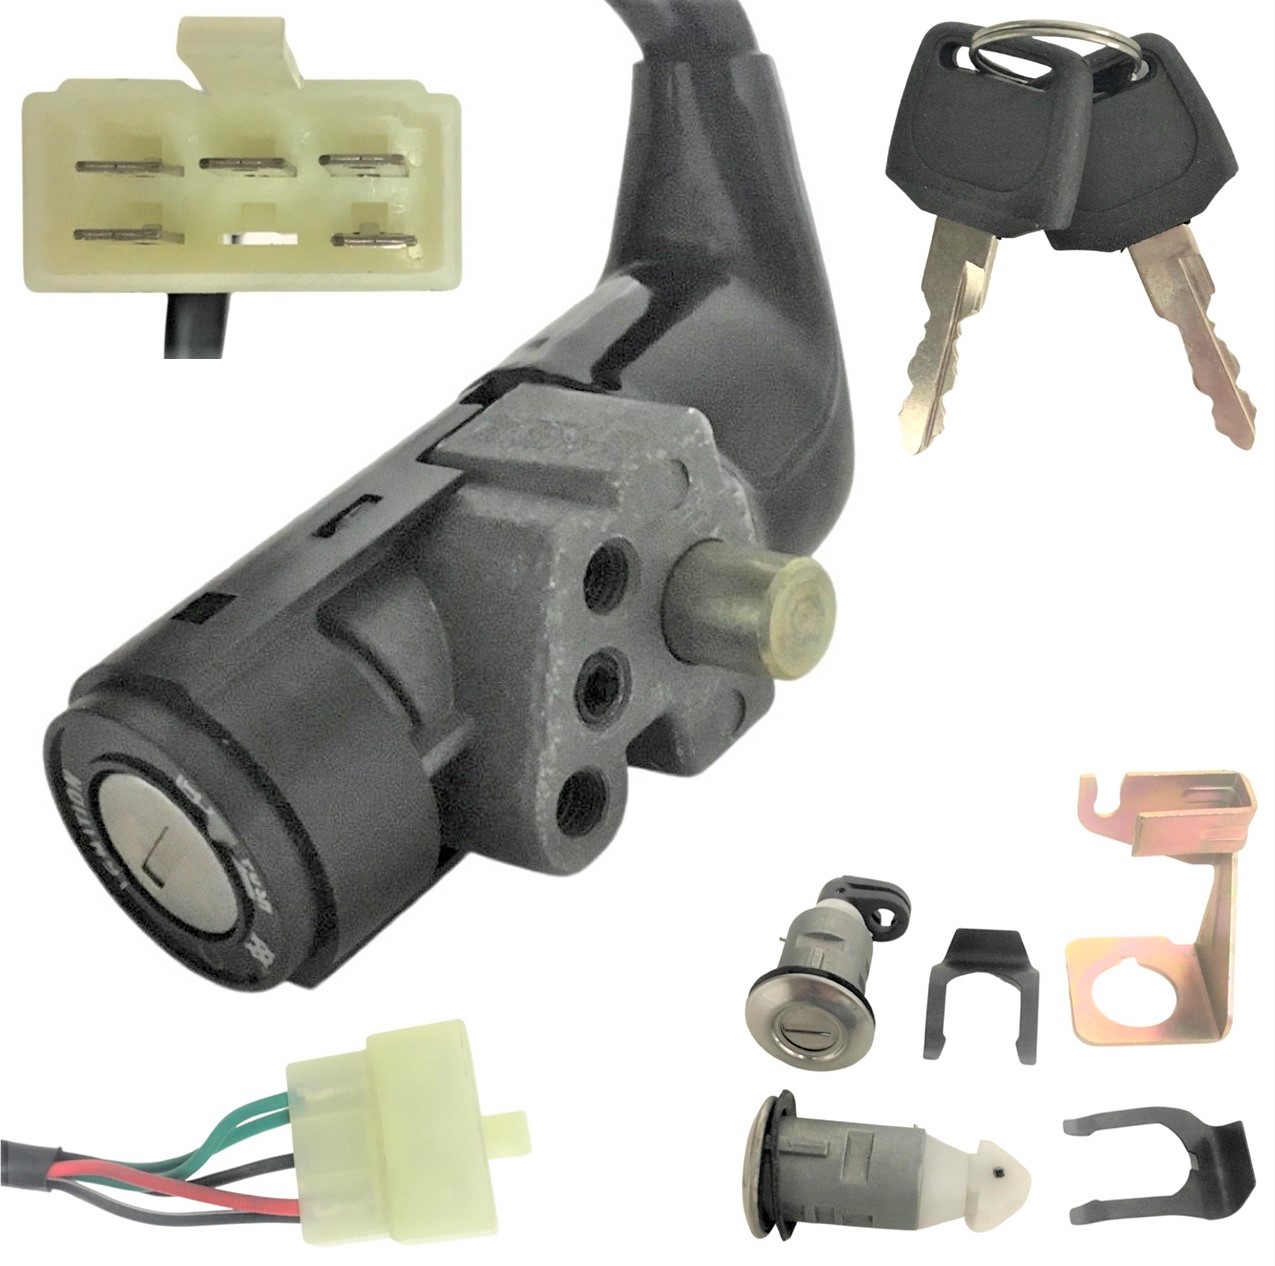 Ignition Switch Fits Many 50-150 Scooters With Seat and Trunk Lock 5 Pin in 6 Pin Female Jack Bolts c/c=18mm - Click Image to Close